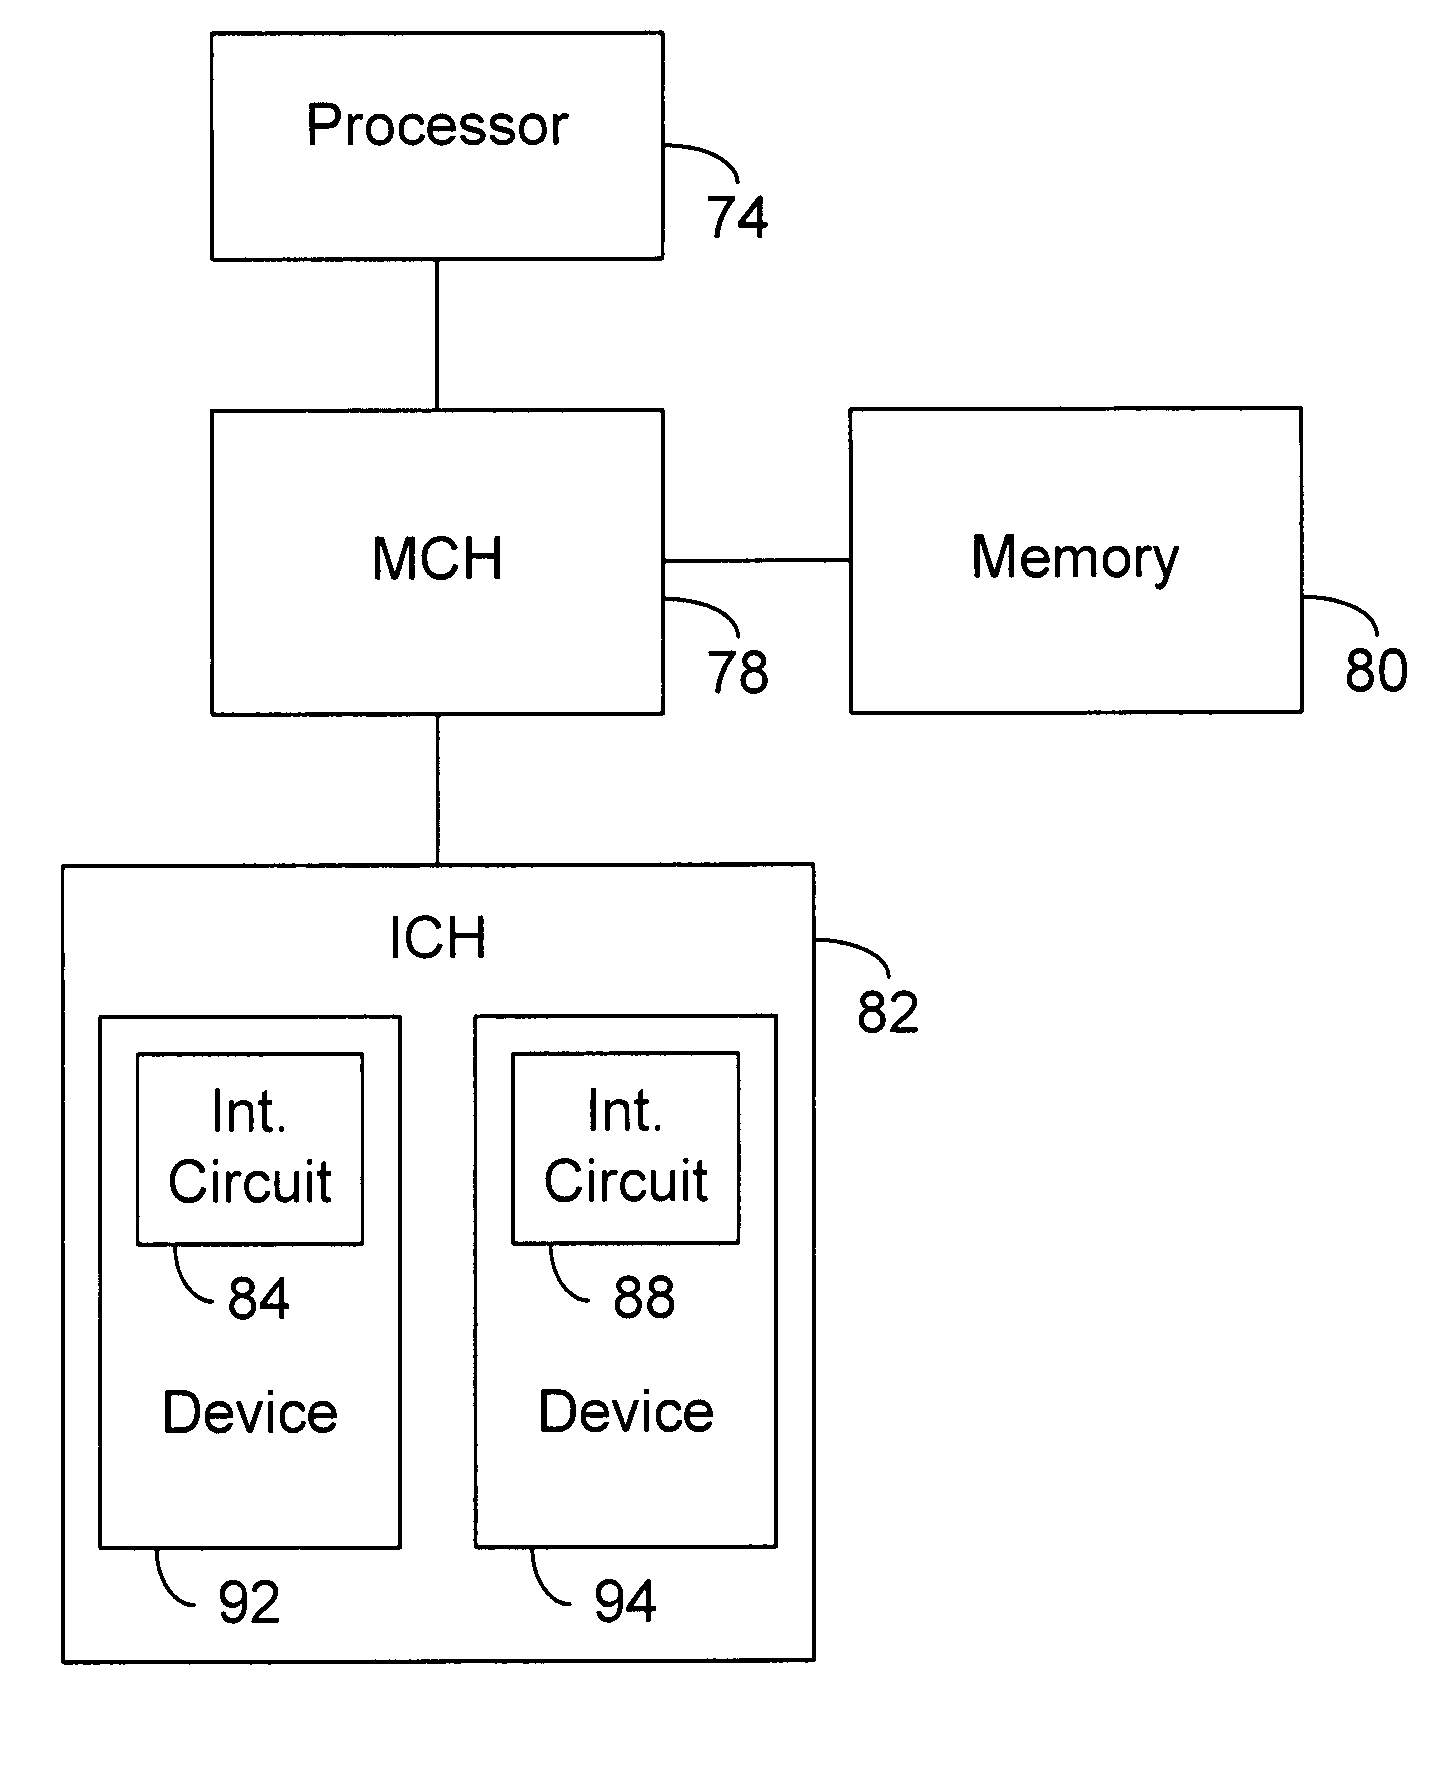 Circuitry to selectively produce MSI signals